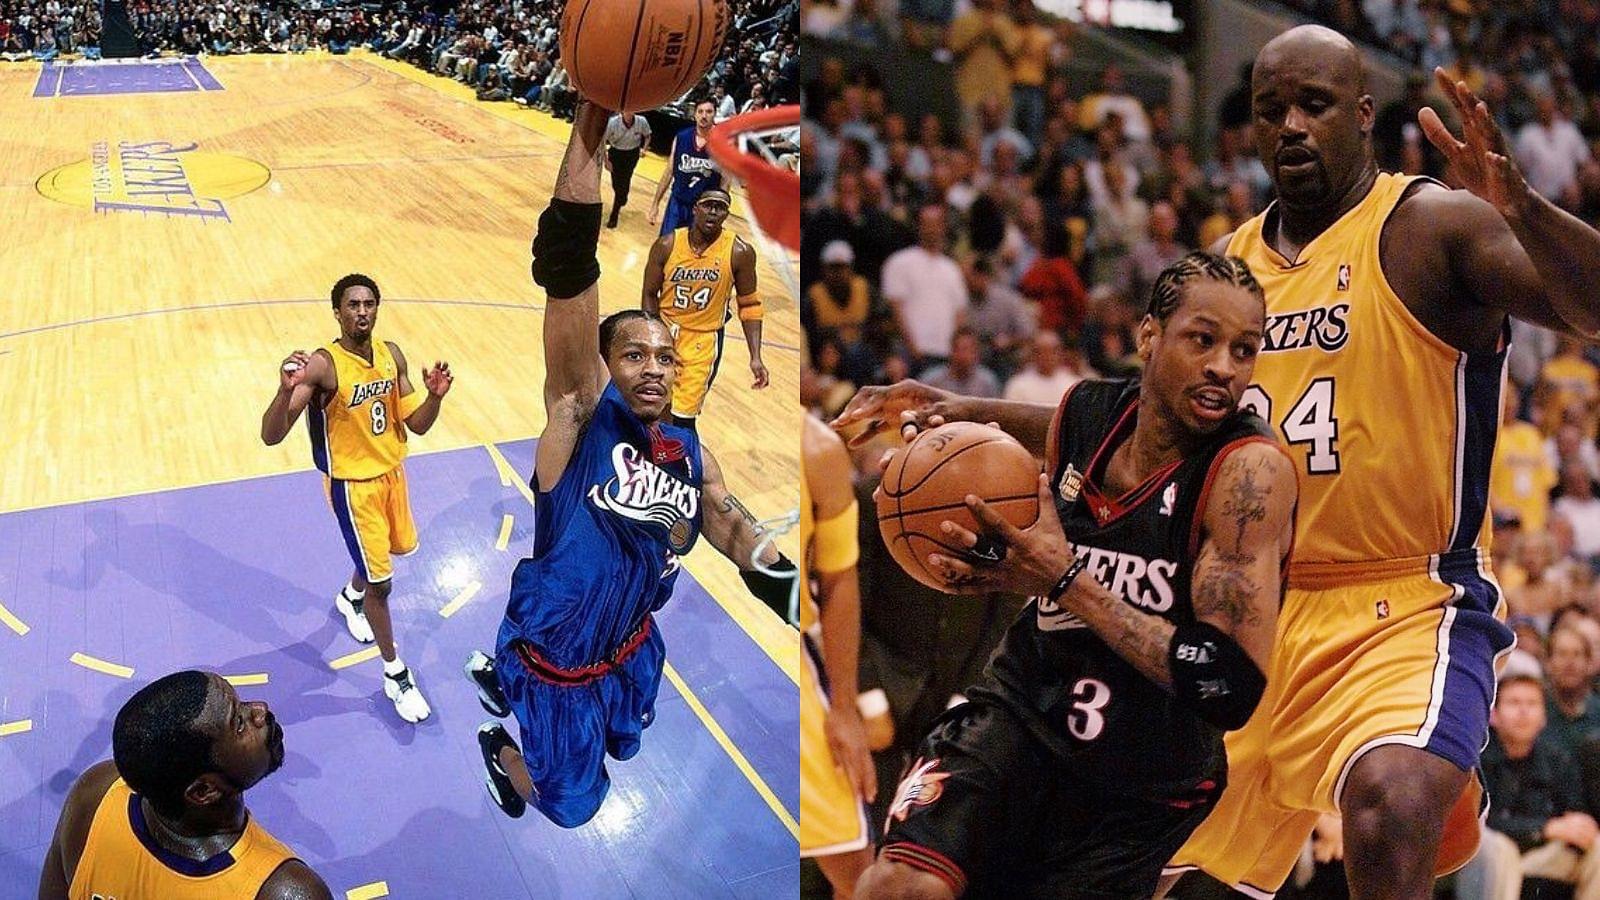 “You Saw I Layed Shaquille O’Neal Didn’t You?”: When Allen Iverson Was Proud and Confident of Making it Big in the NBA